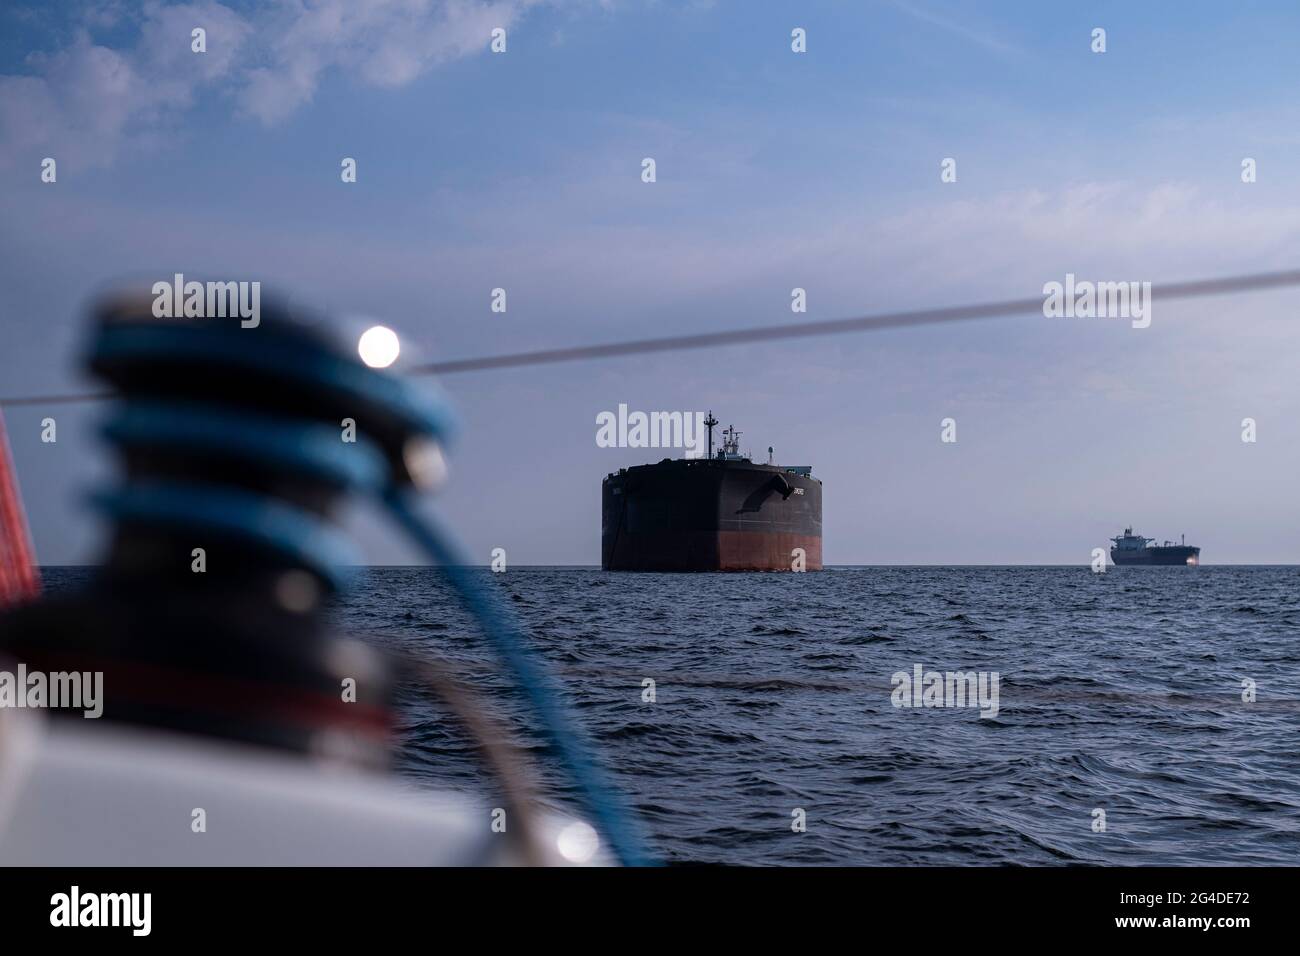 Cargo ship anchoring in the roads Stock Photo